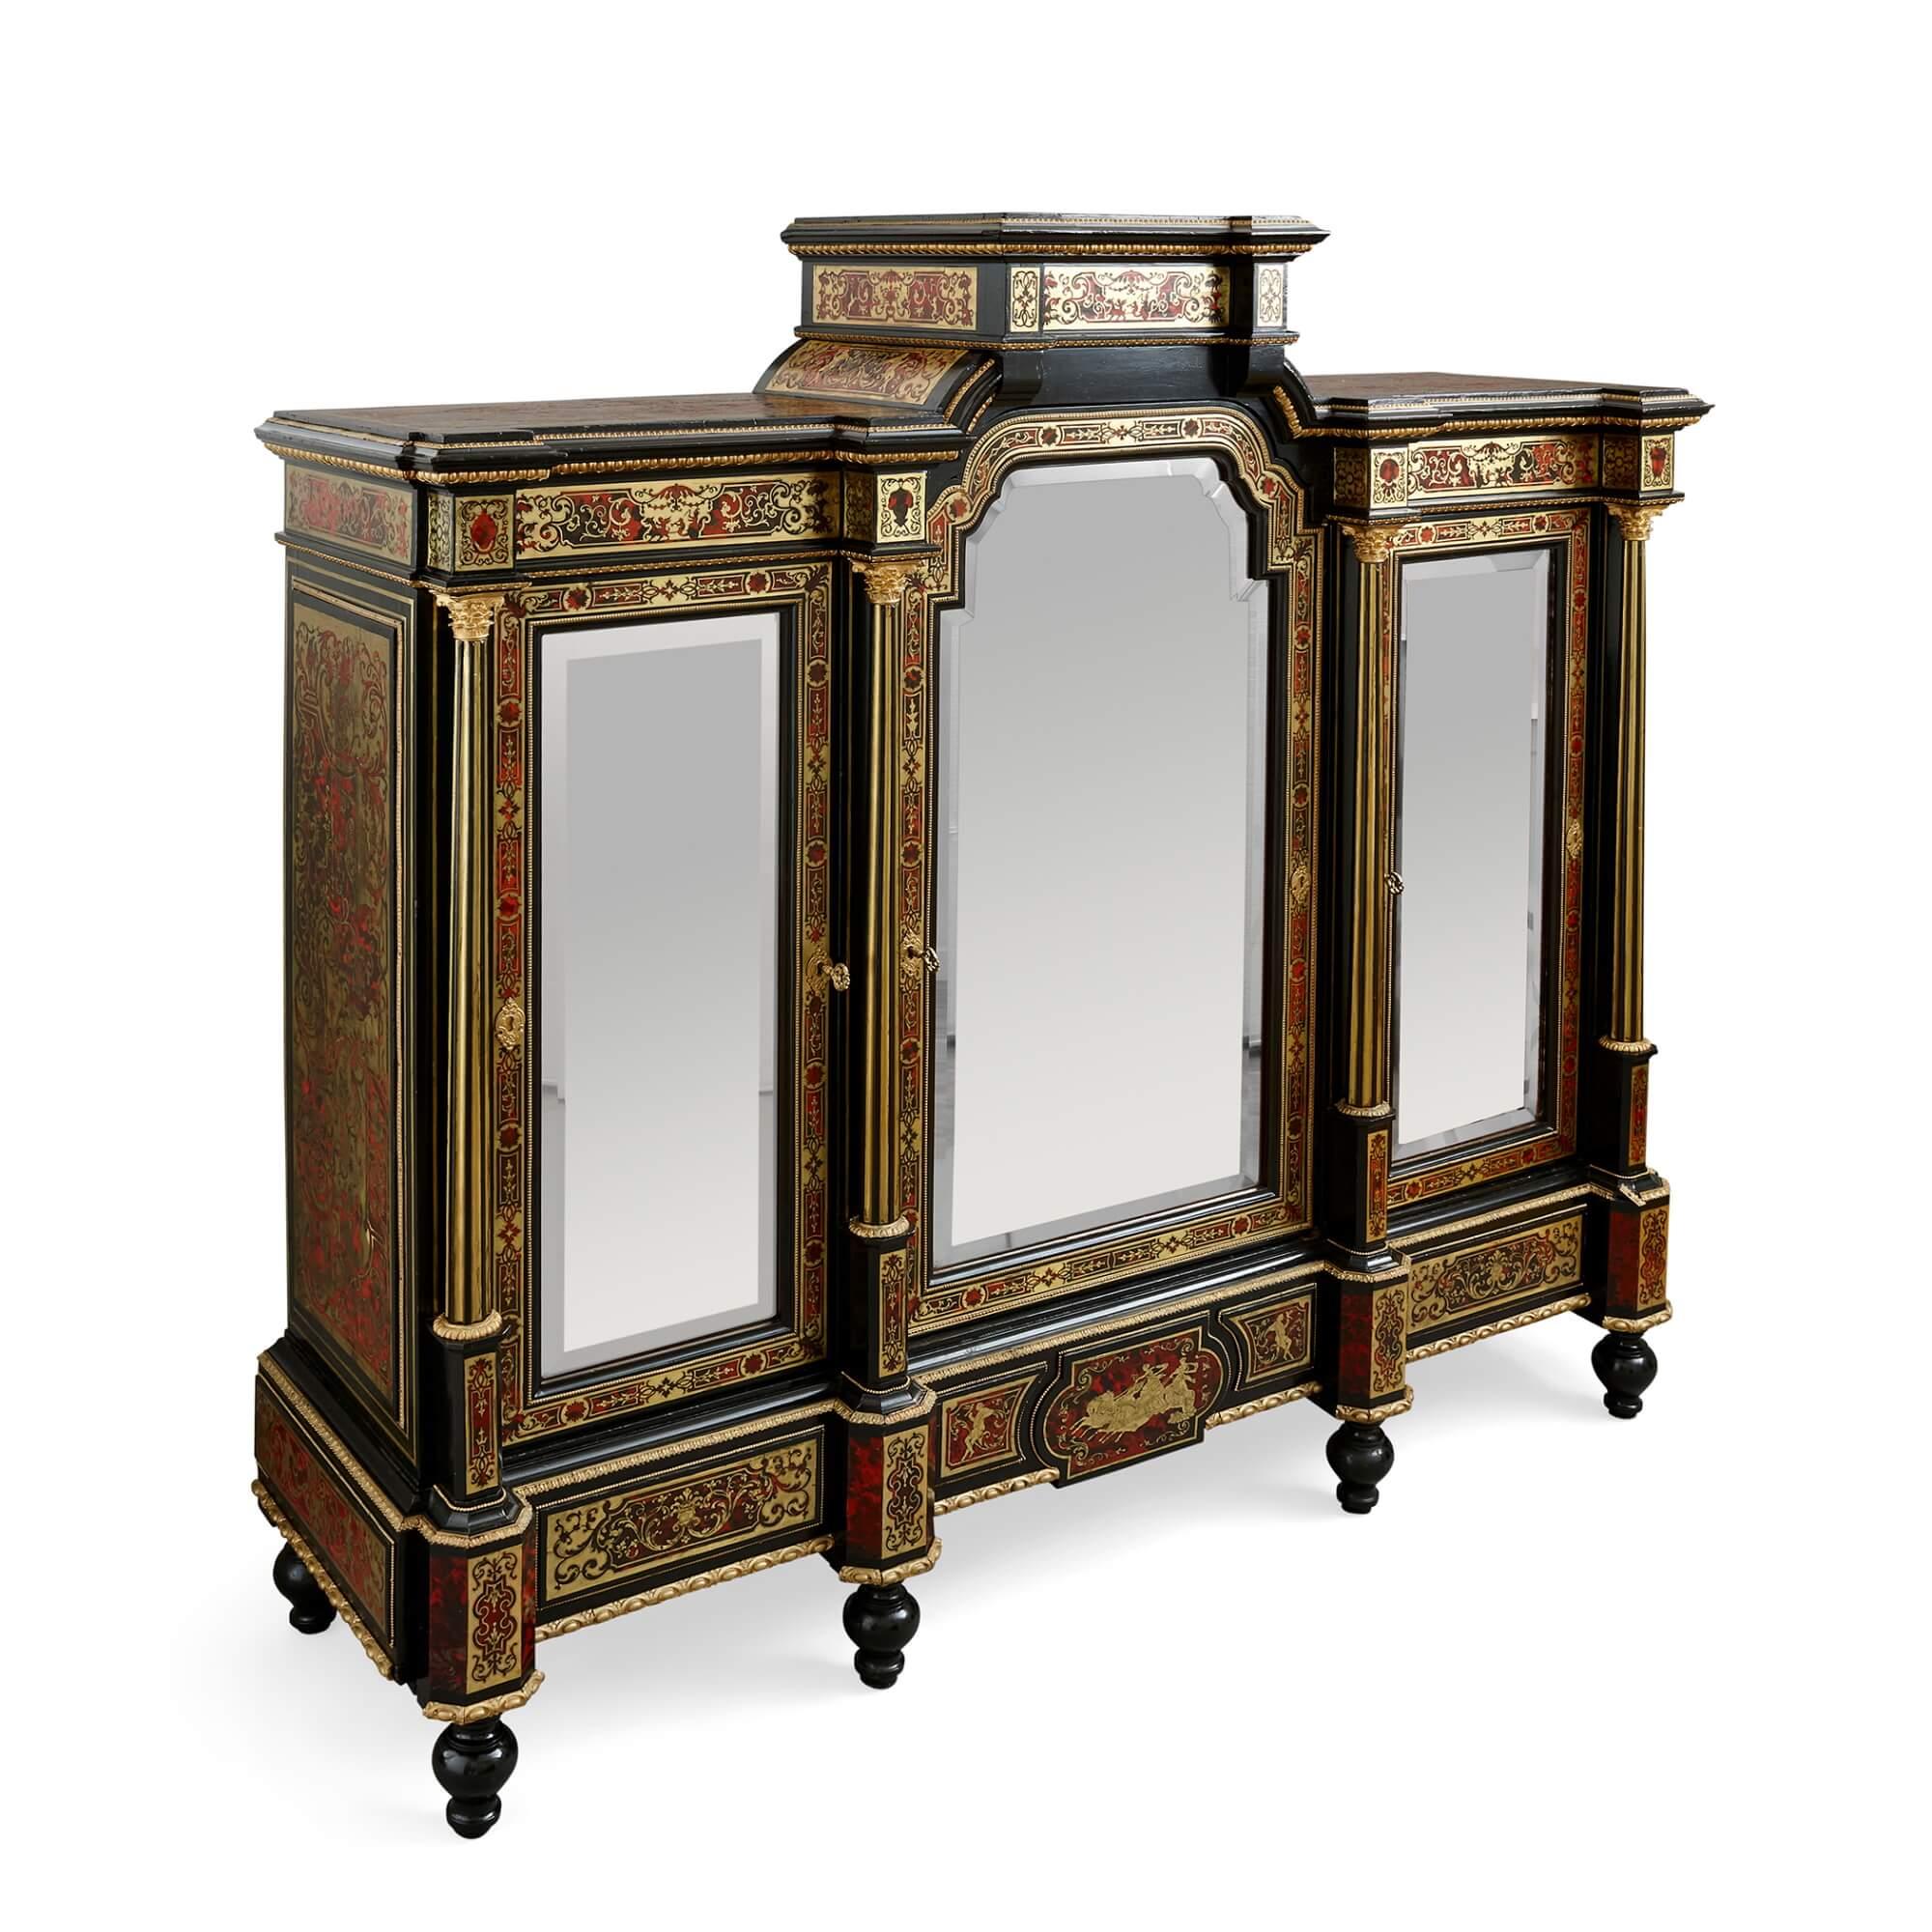 Fine and Unusual Napoleon III period antique French Boulle marquetry cabinet
French, c.1870
Height 165cm, width 174cm, depth 51cm

This piece is a splendid, ebonised wood antique cabinet decorated with Boulle inlay and ormolu mounts, formed with